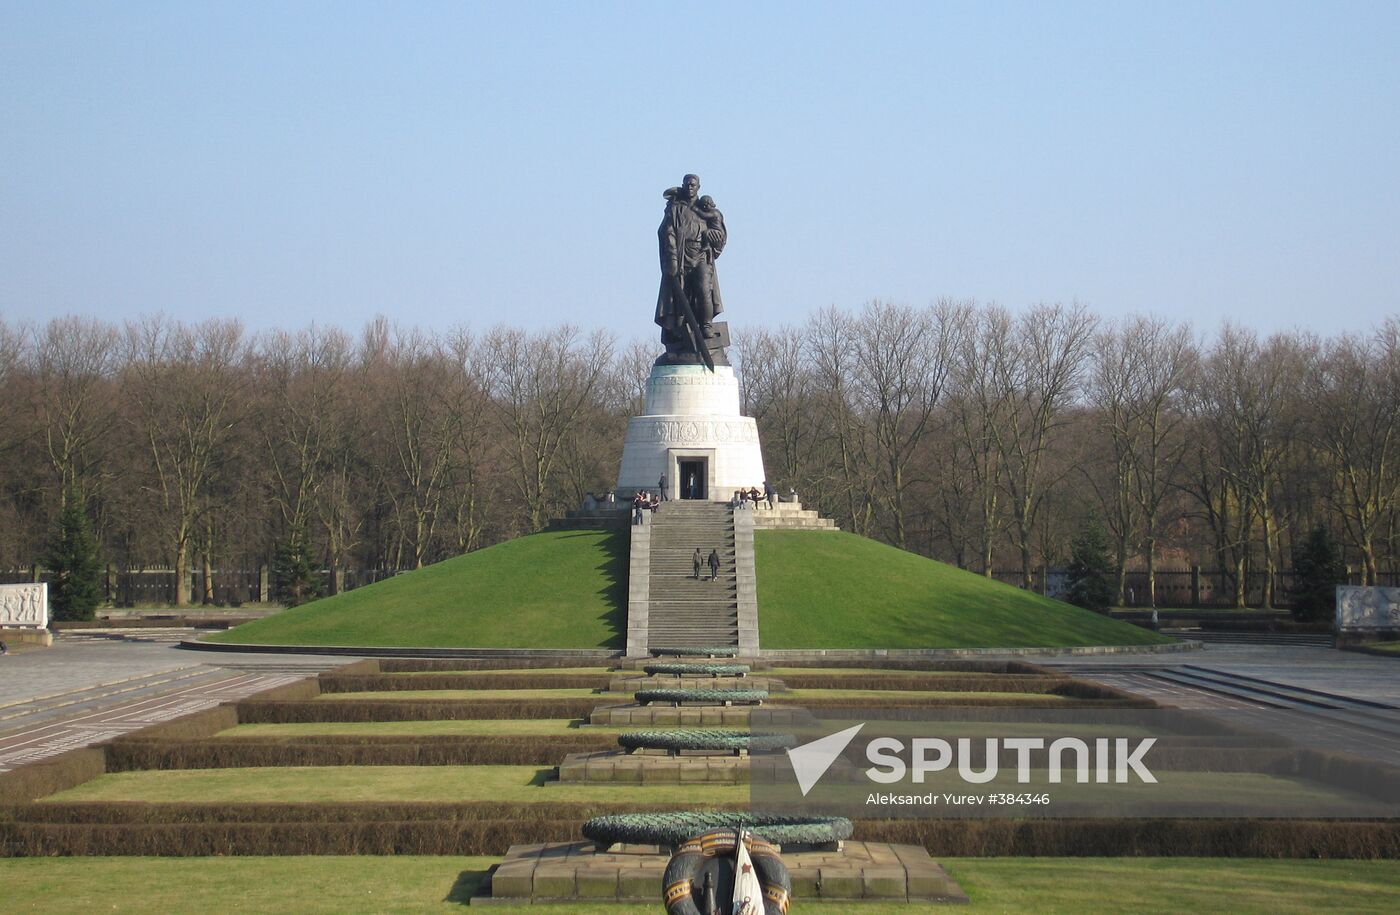 Monument to the Soviet liberator in Treptower Park, Berlin